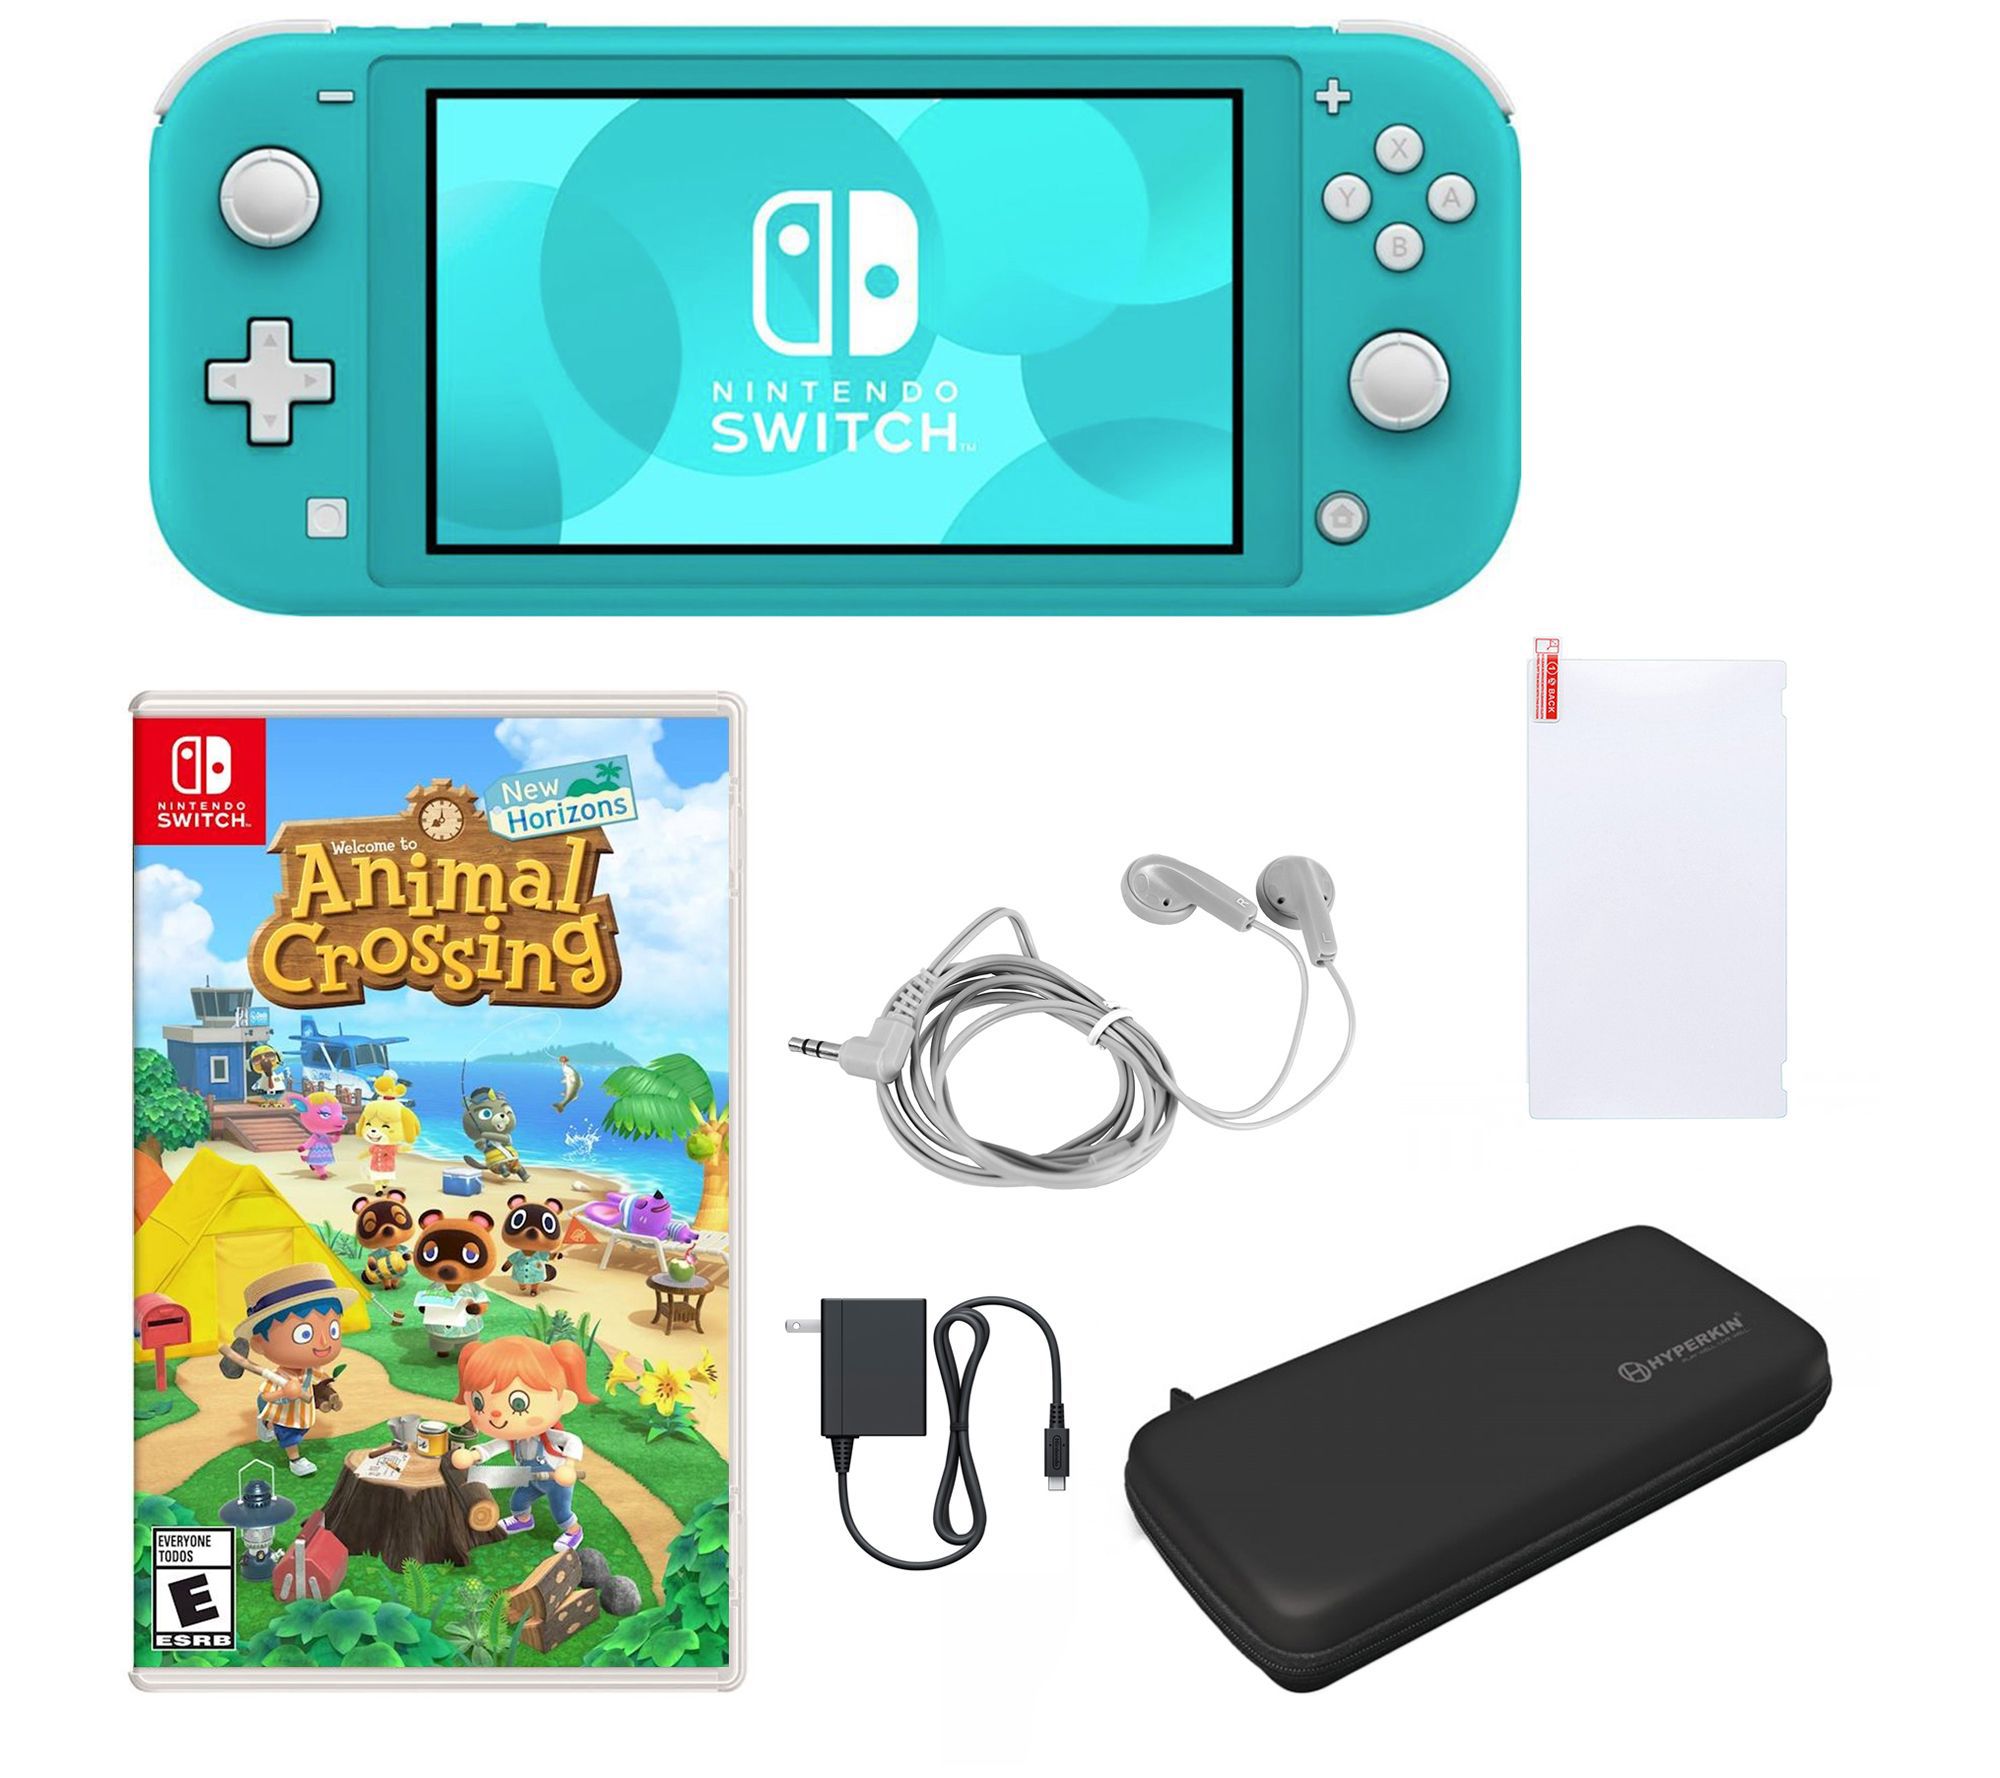 Nintendo Switch Lite With Animal Crossing Game And Accessories Qvc Com